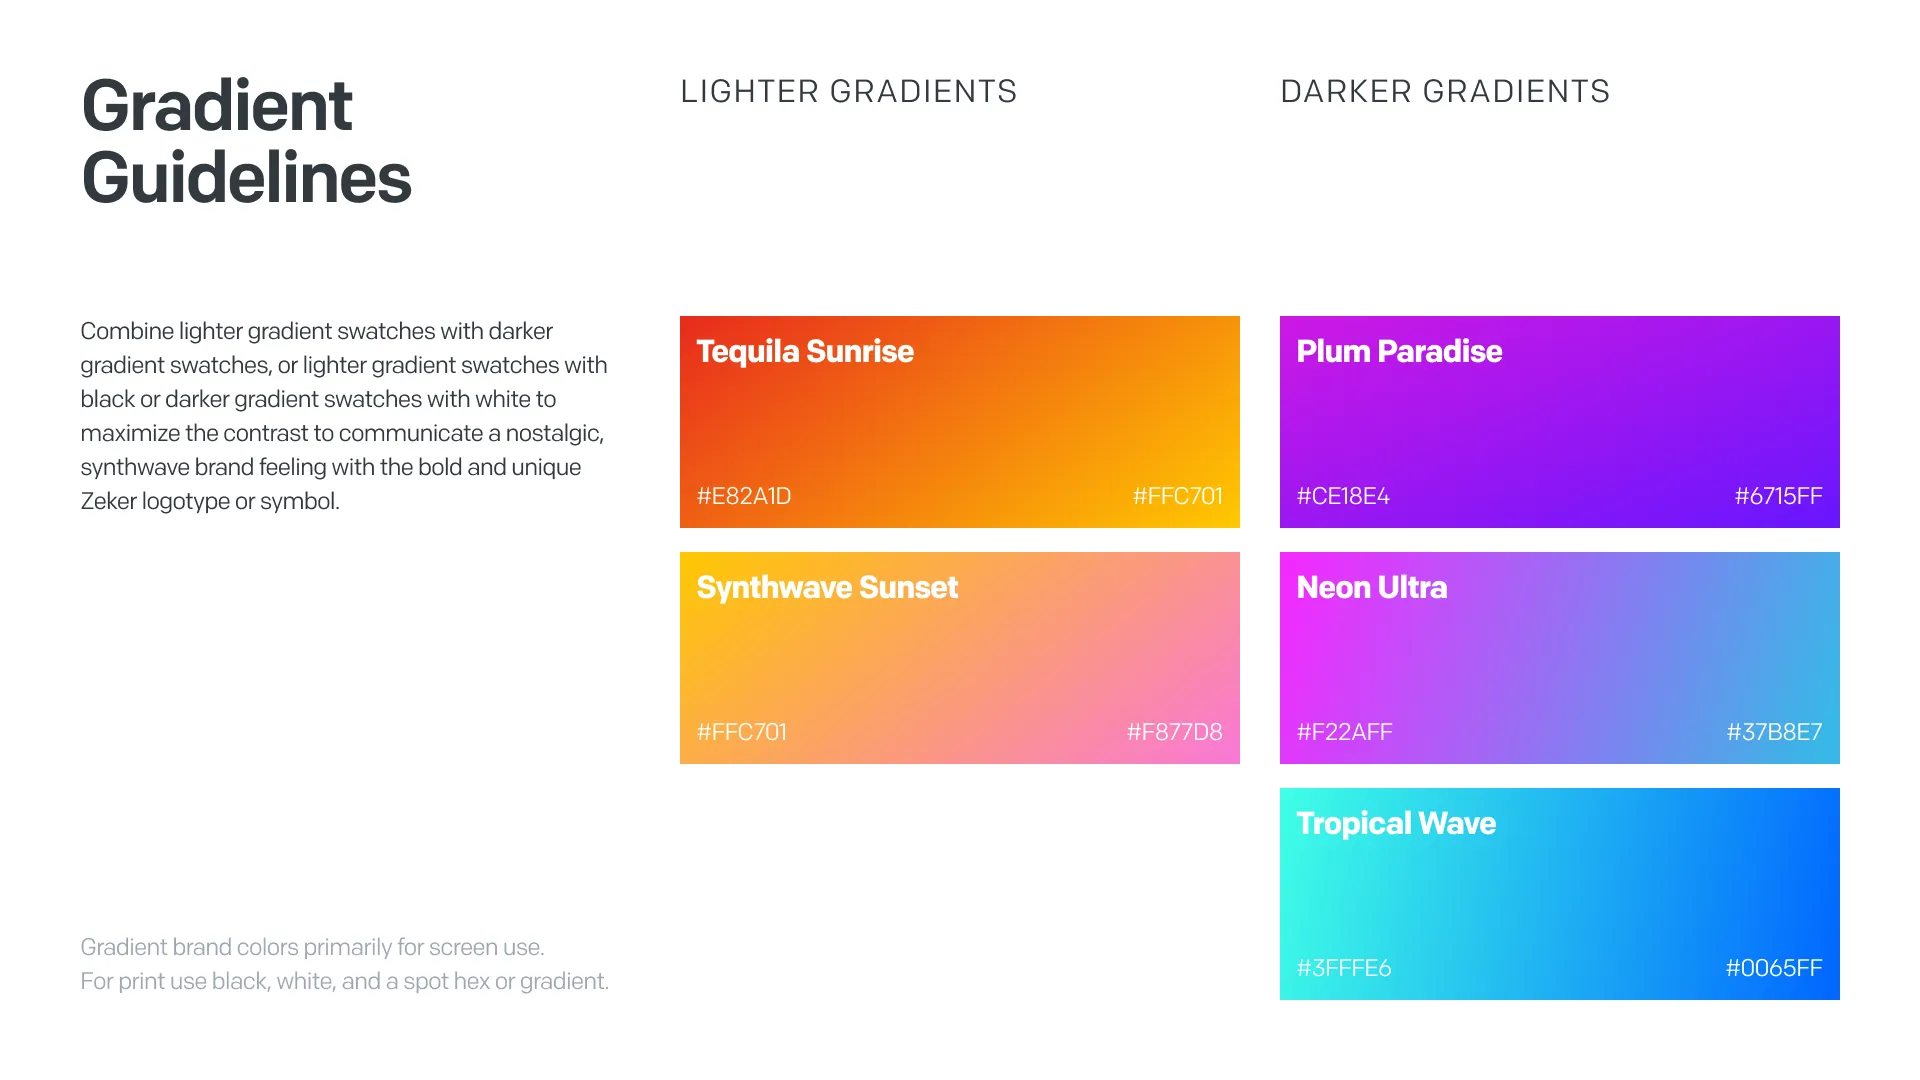 Gradient usage guidelines for Zeker brand